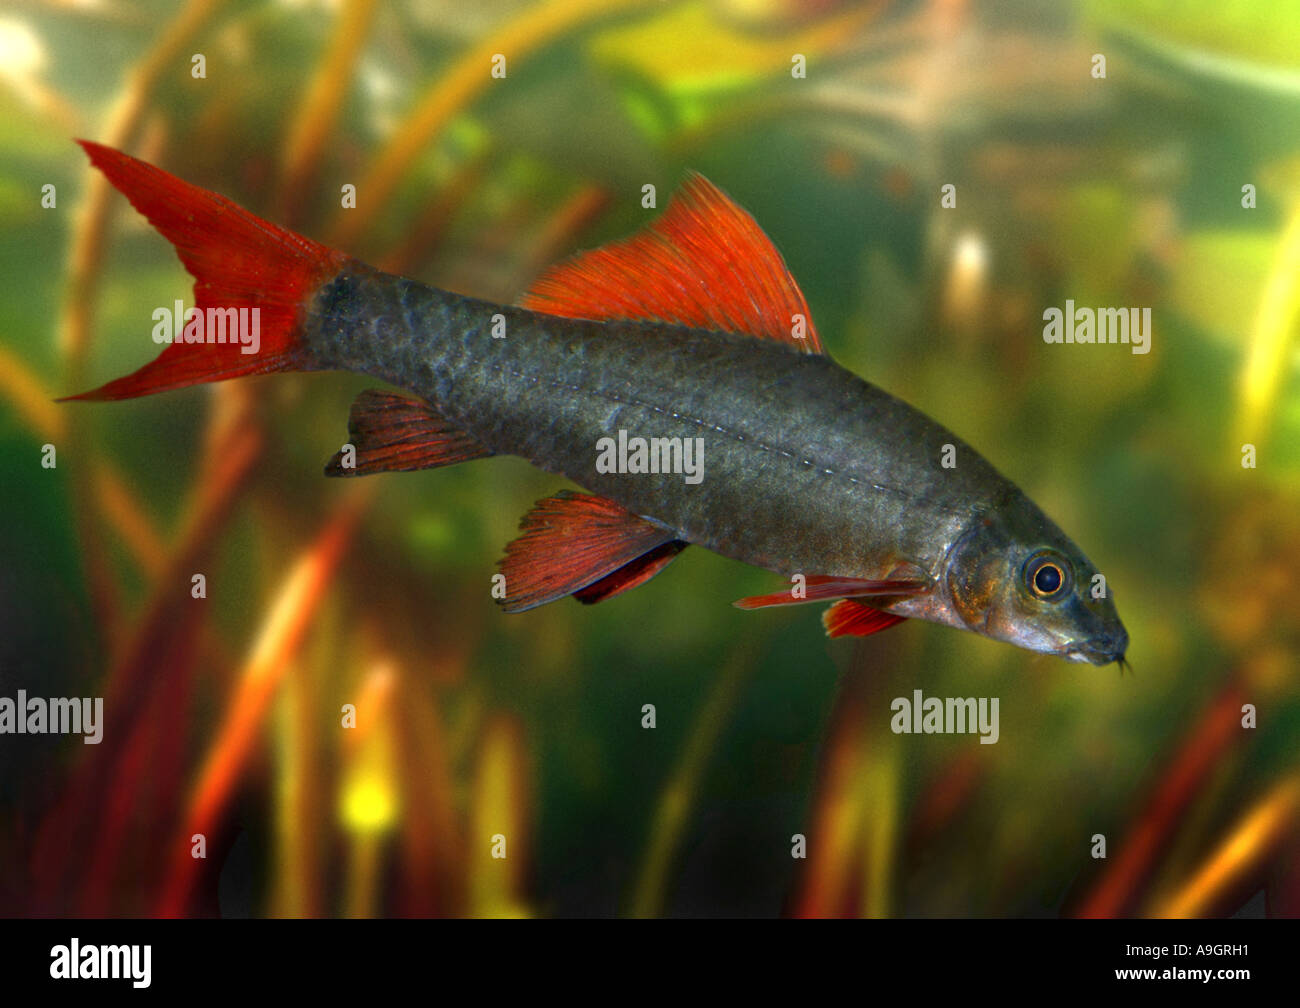 redtail sharkminnow, red-tailed shark, red-tailed black shark (Labeo bicolor, Epalzeorhynchus bicolor) Stock Photo